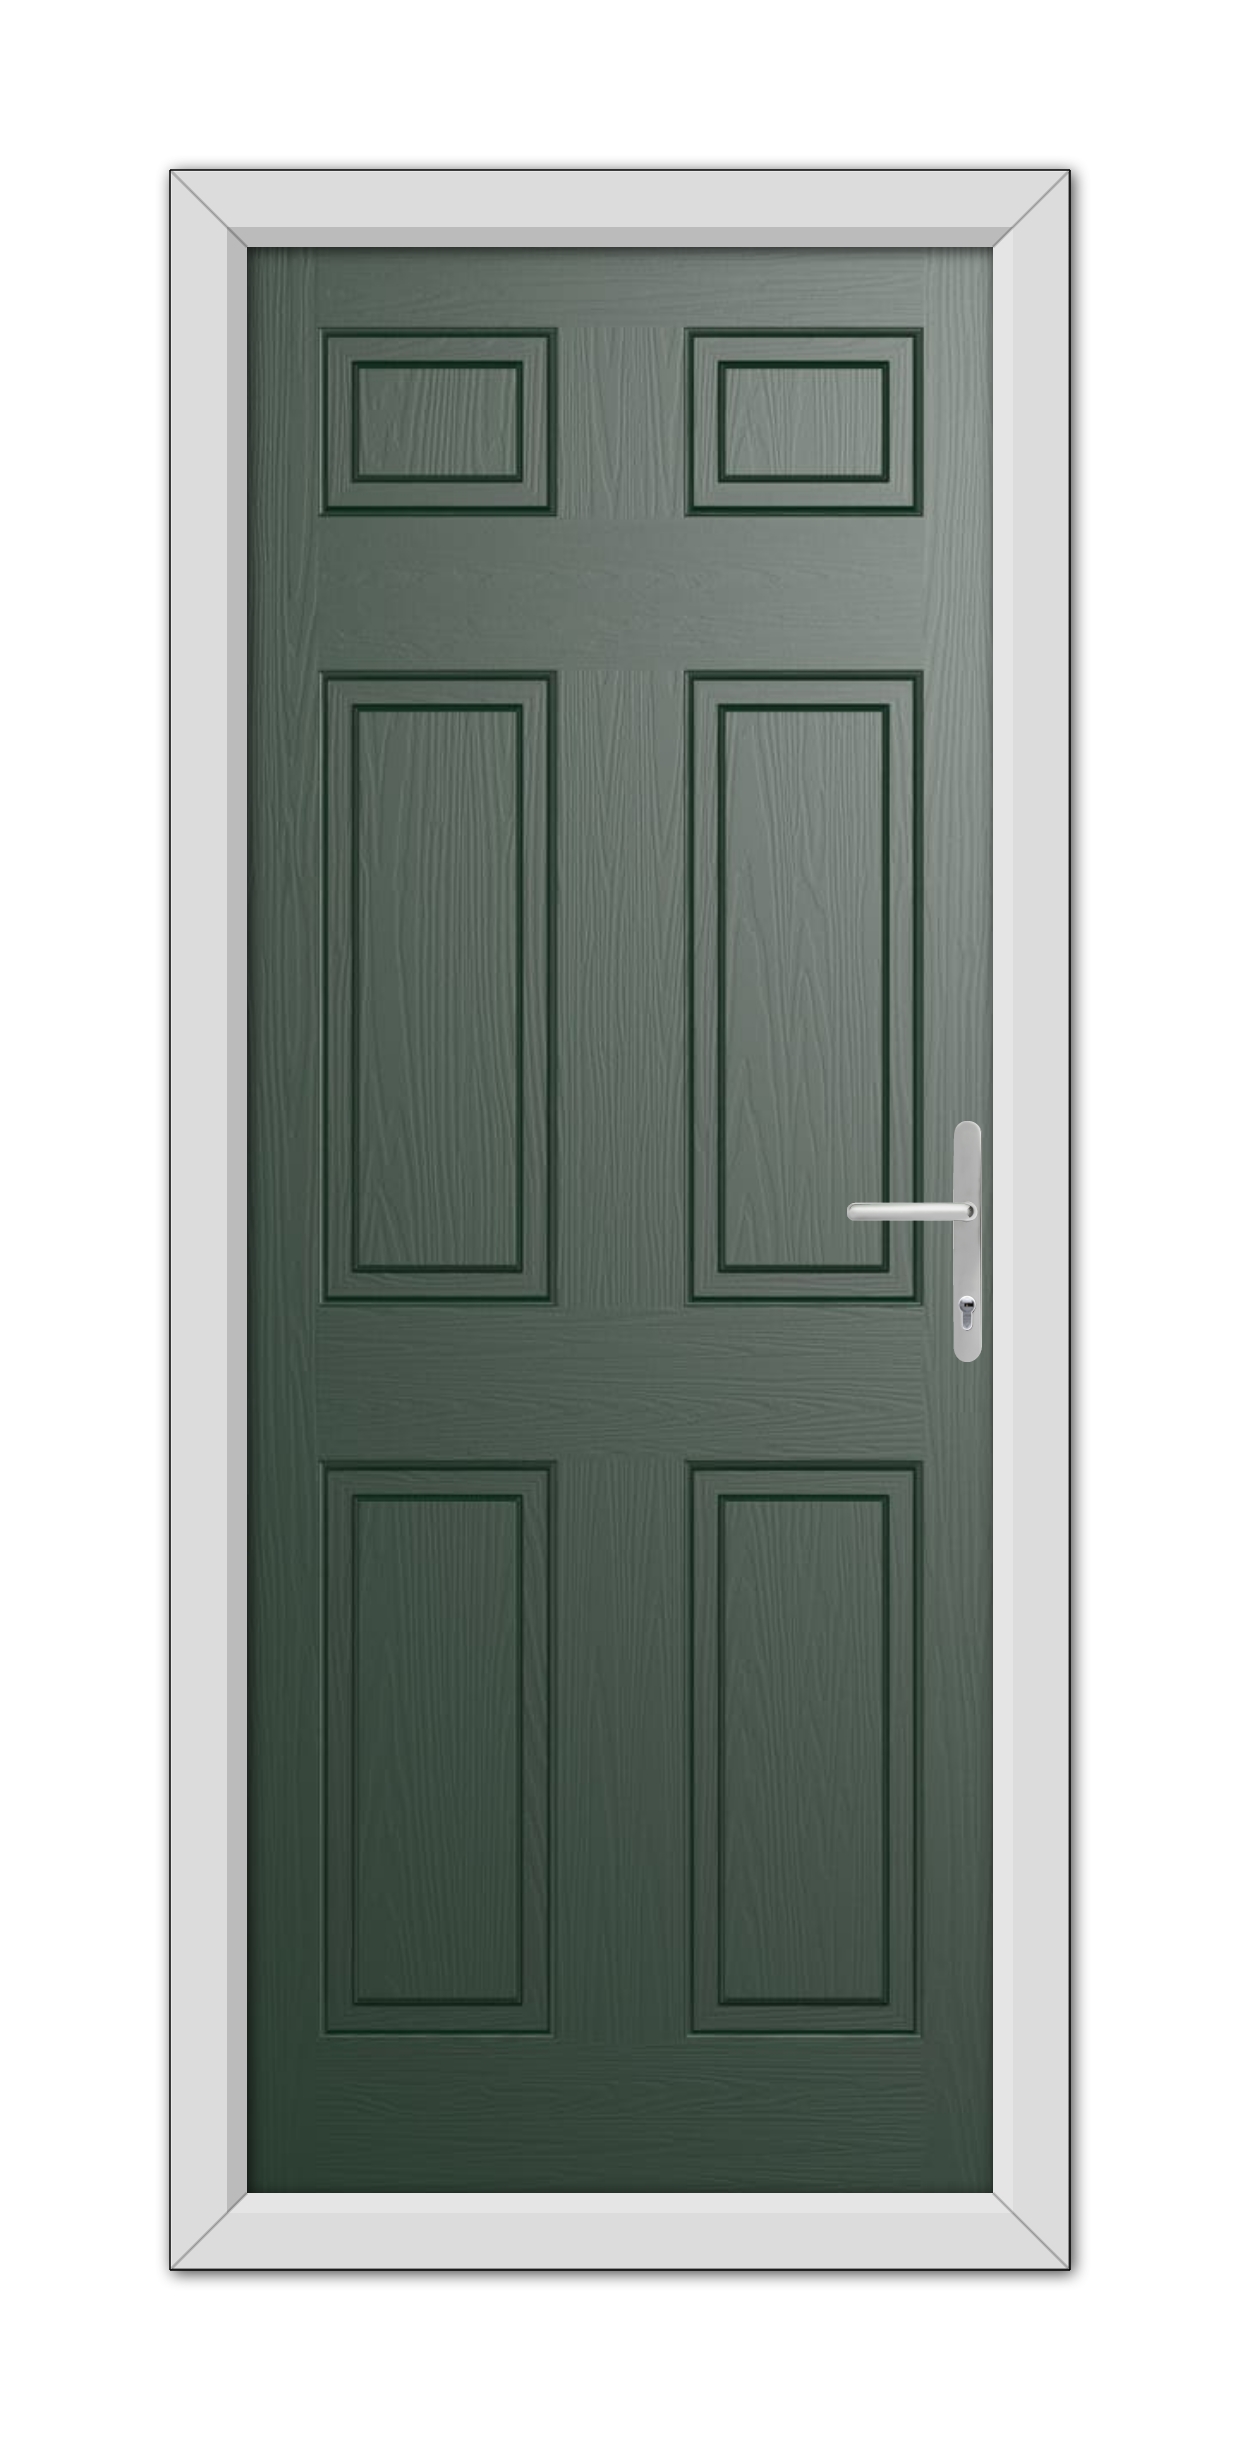 A modern Green Middleton Solid Composite Door 48mm Timber Core with six panels and a white frame, featuring a silver handle on the right side.